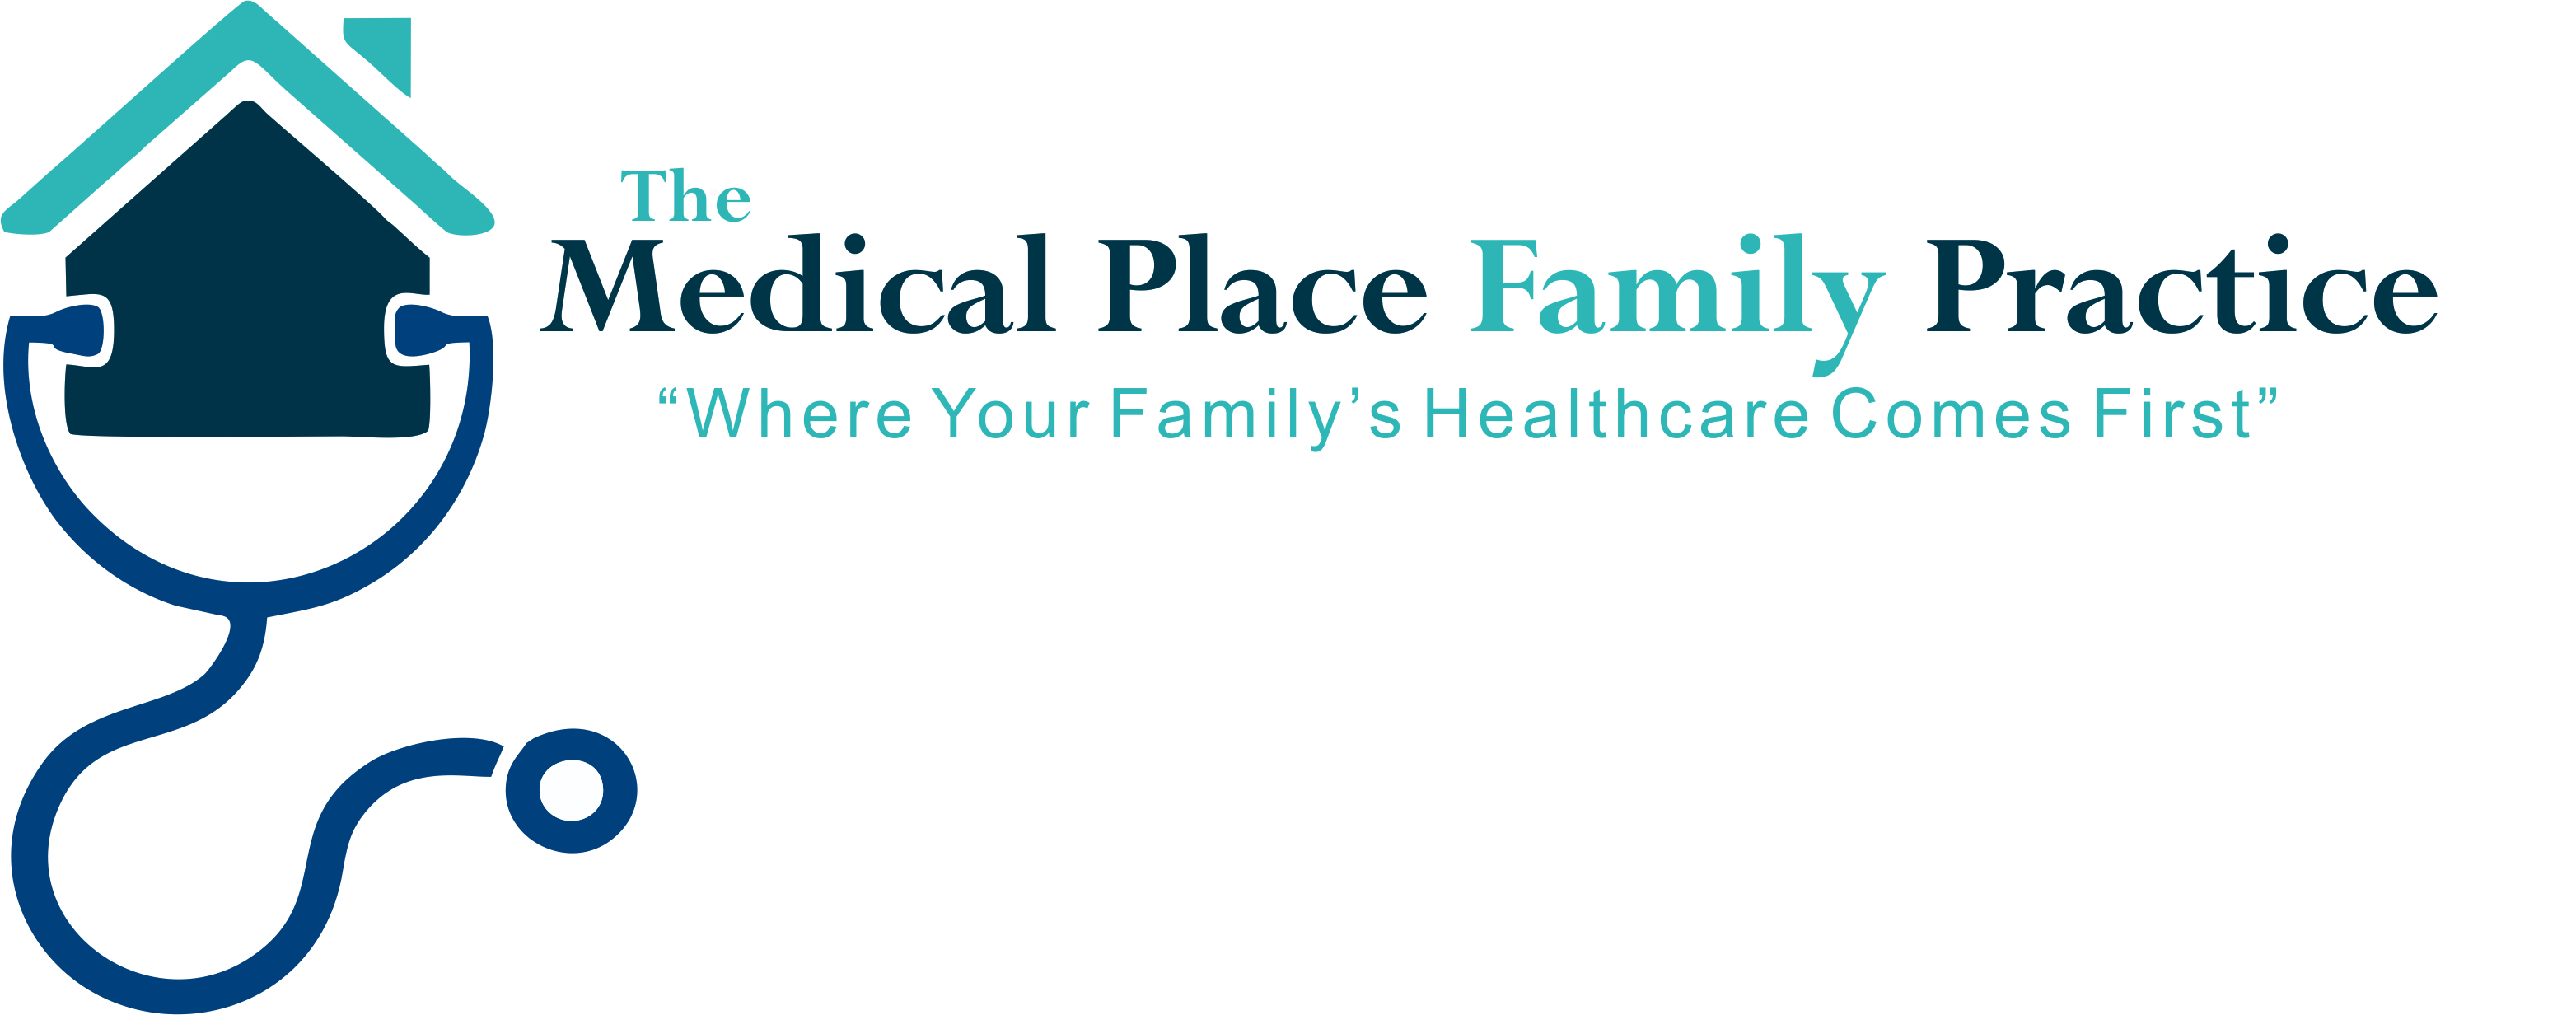 The Medical Place Family Practice